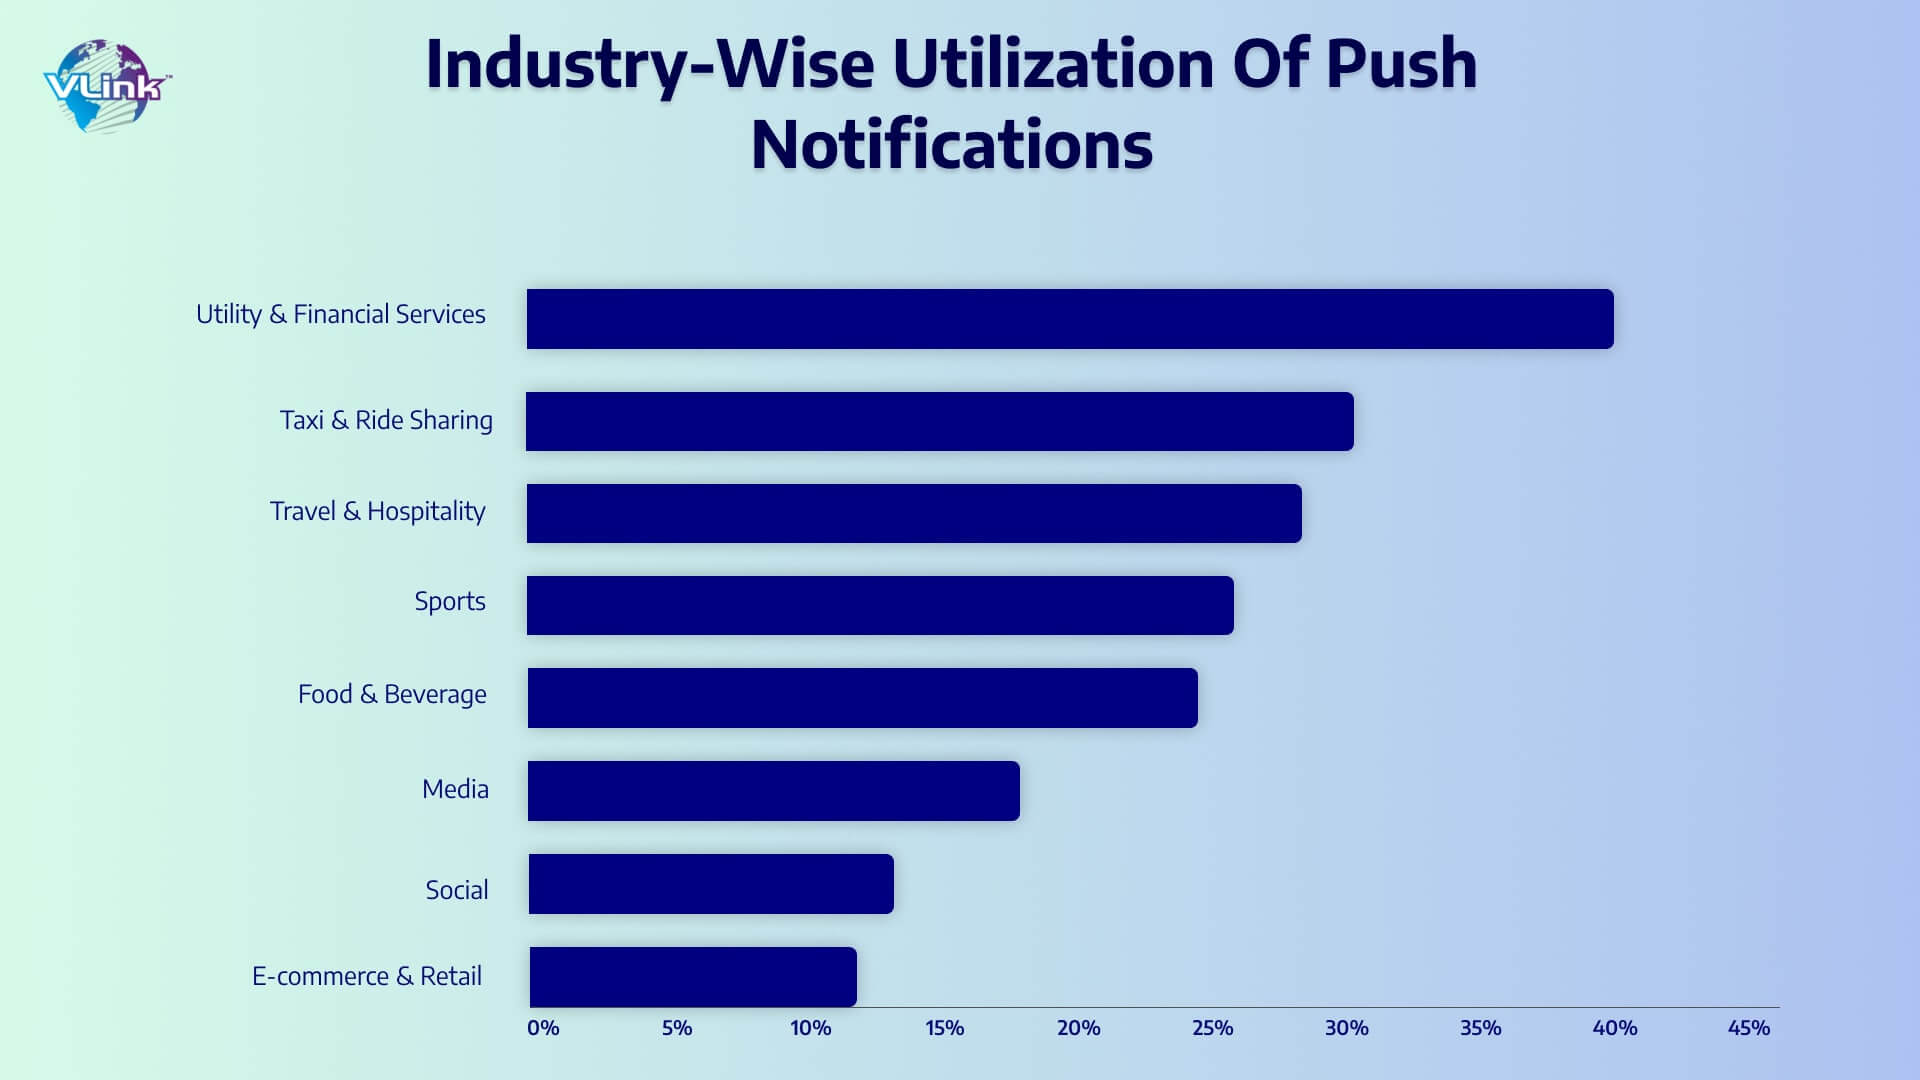 Industry wise utilization of push notifications